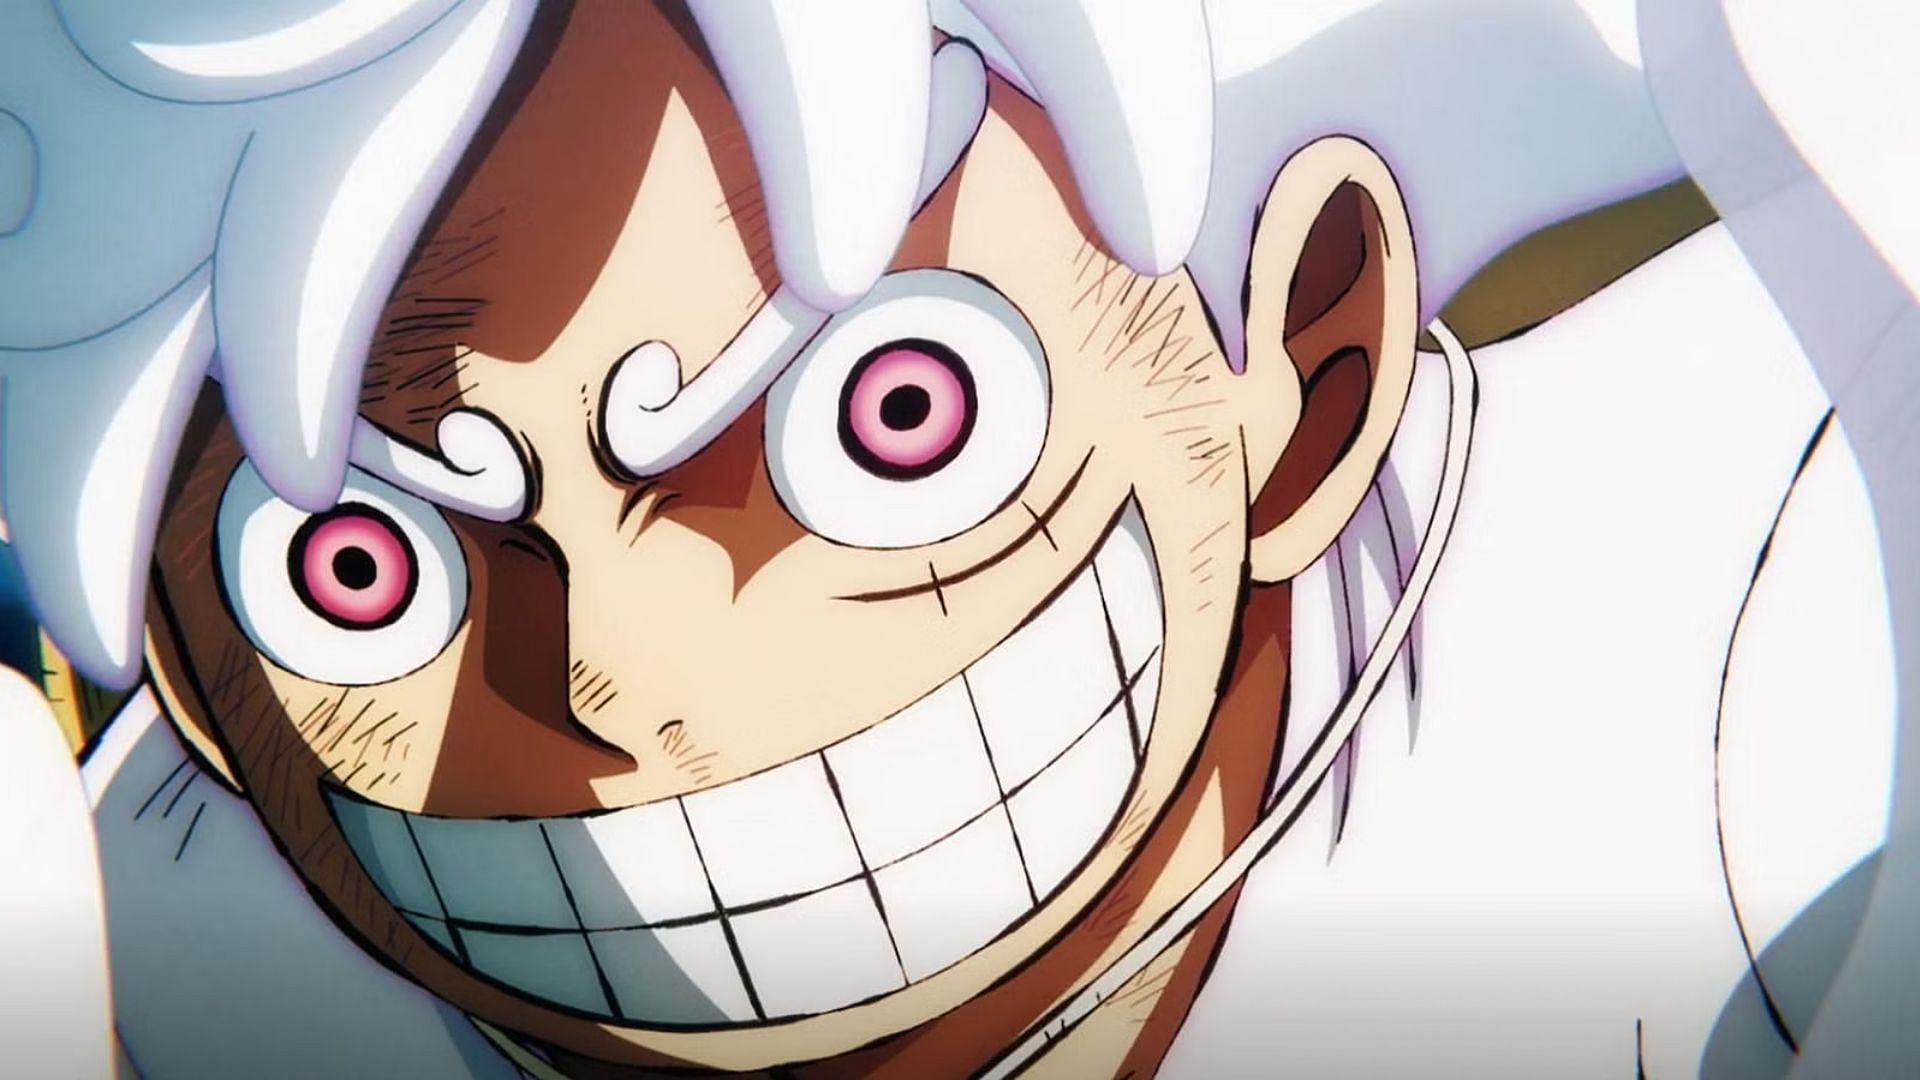 Monkey D. Luffy in his Gear 5 form (Image via Toei Animation)